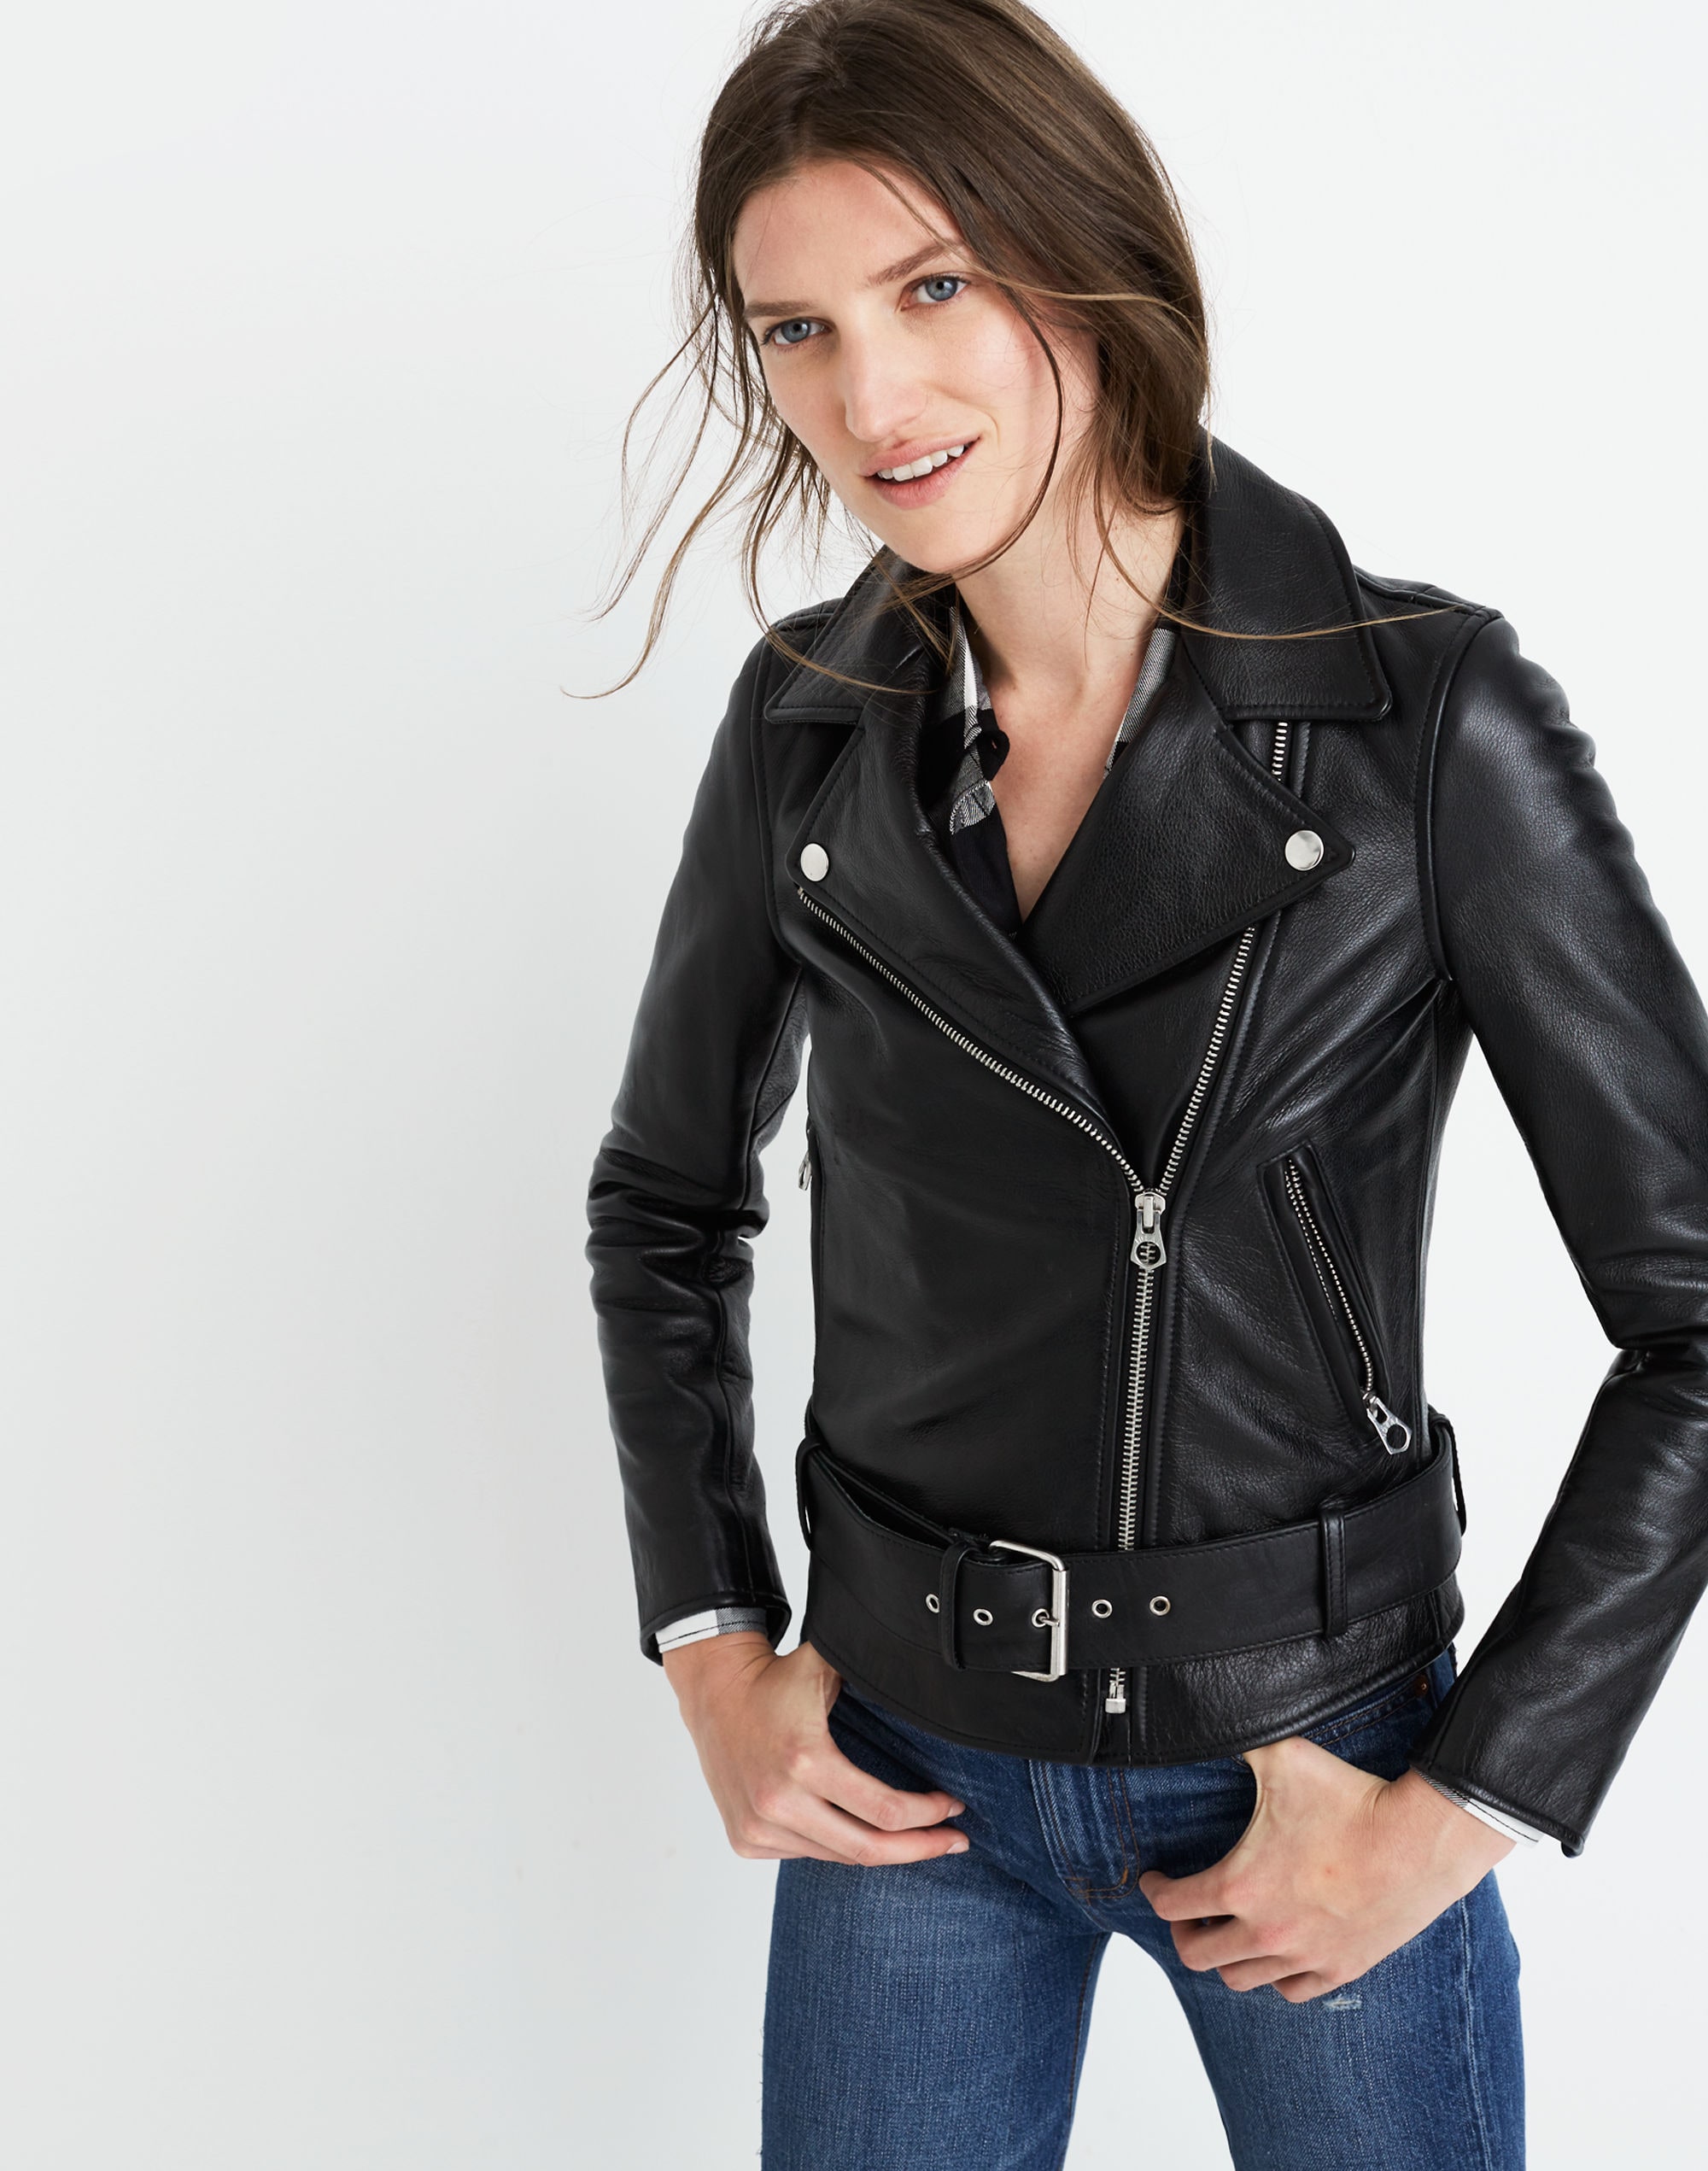 The Ultimate Leather Motorcycle Jacket